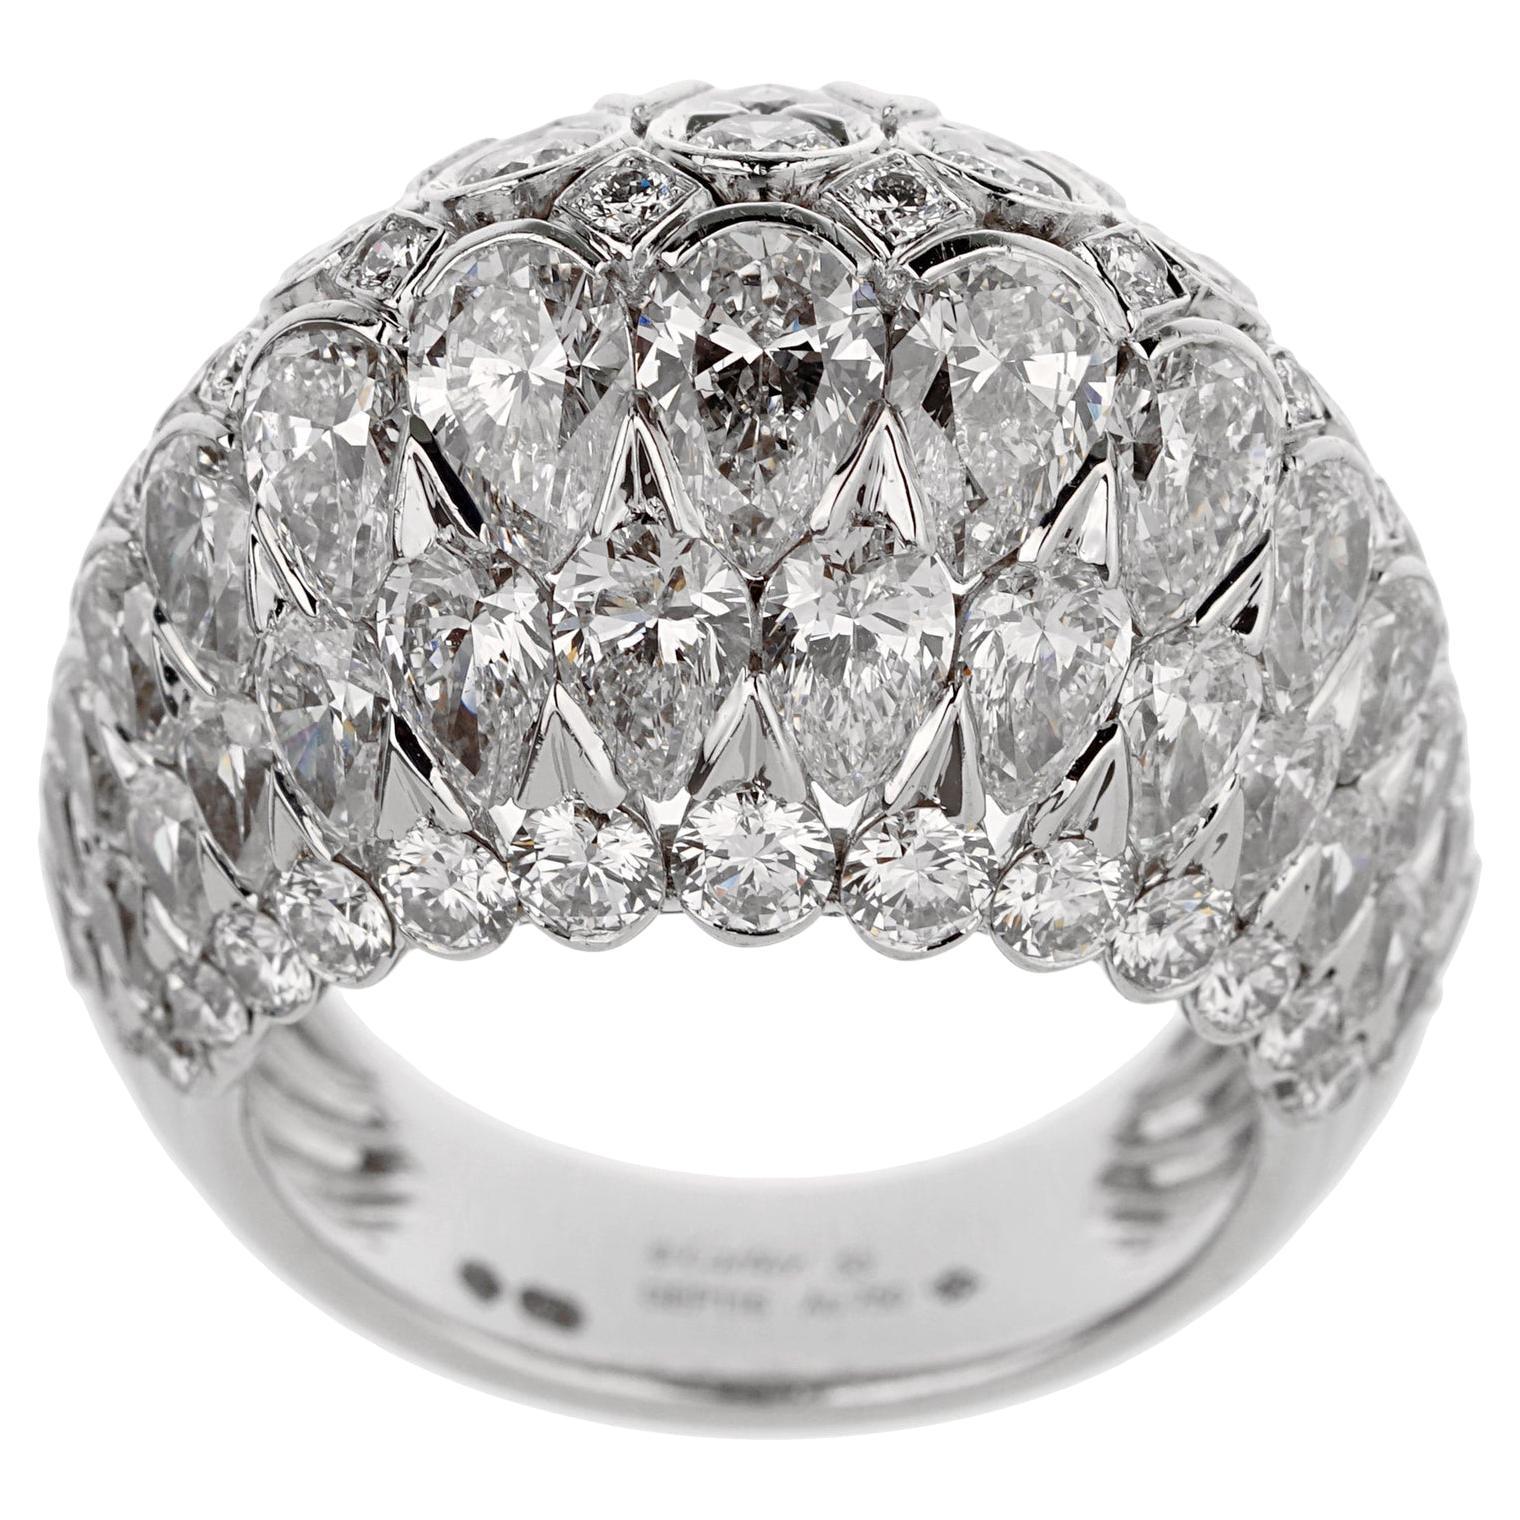 Cartier Pluie Diamond Bombe White Gold Cocktail Ring